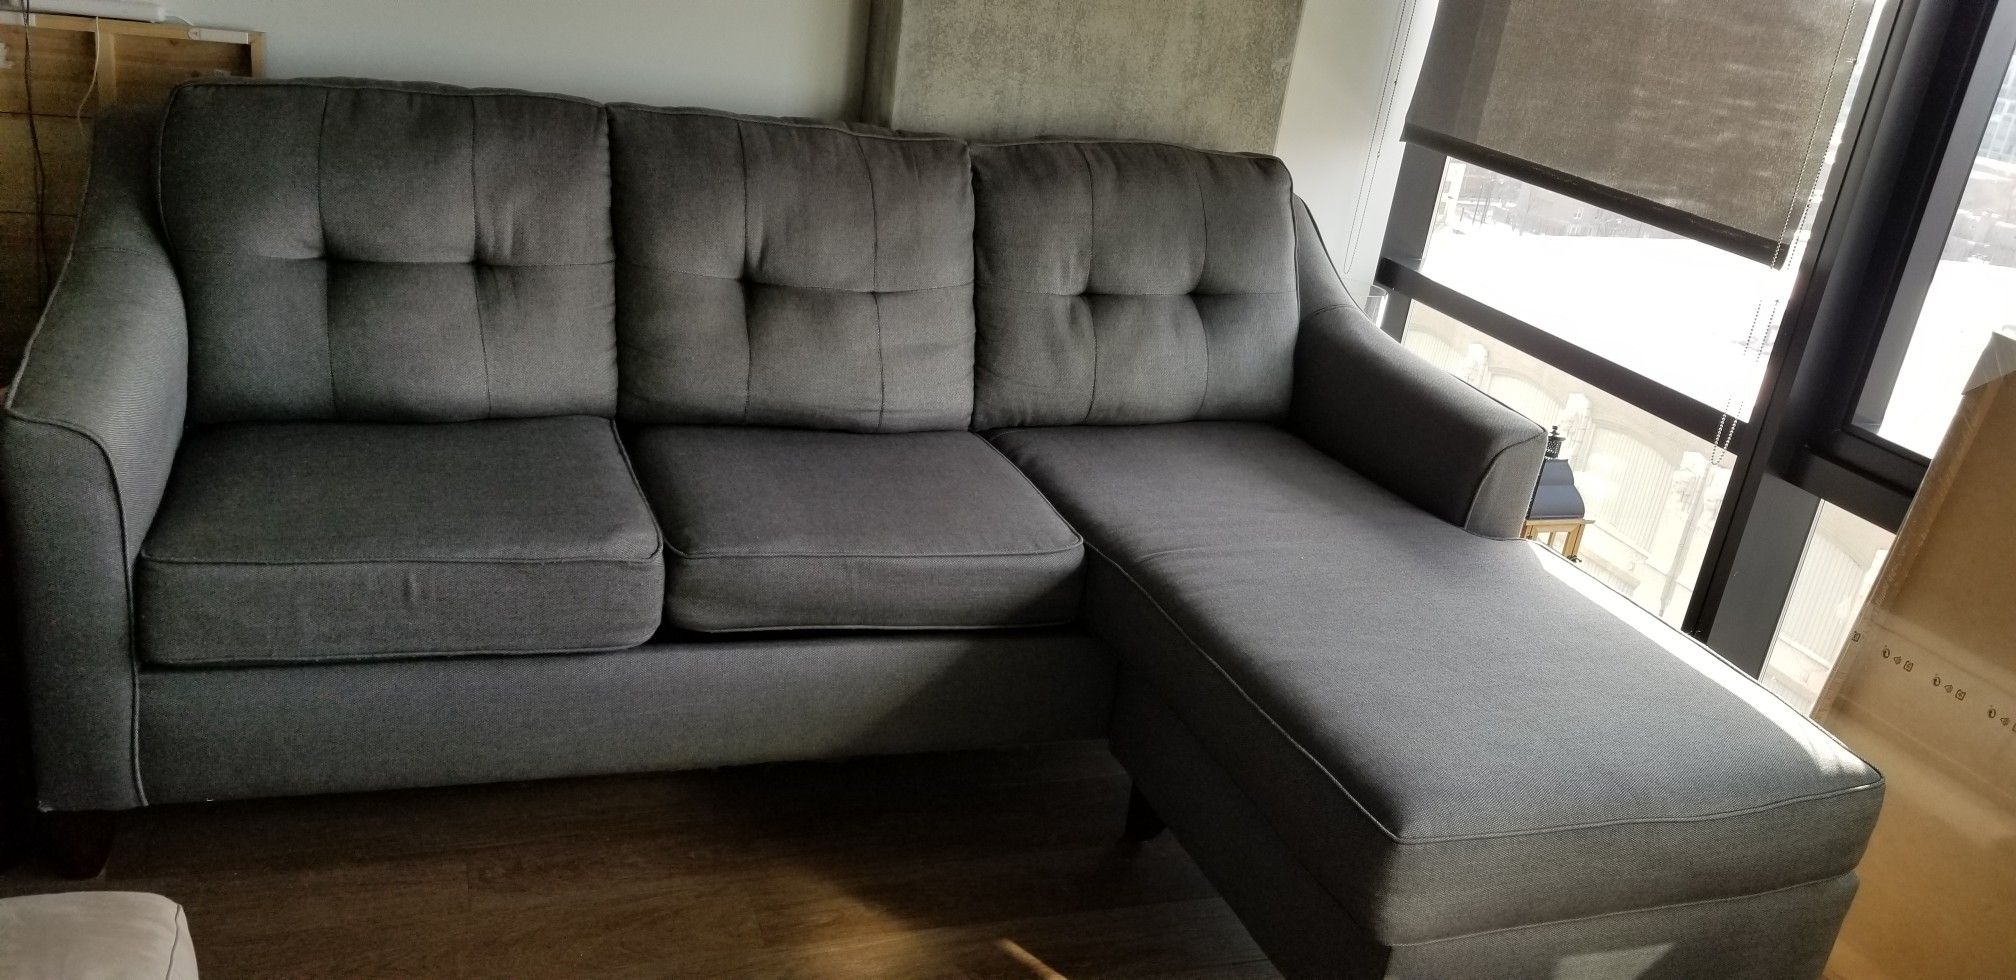 Sectional for free gratis